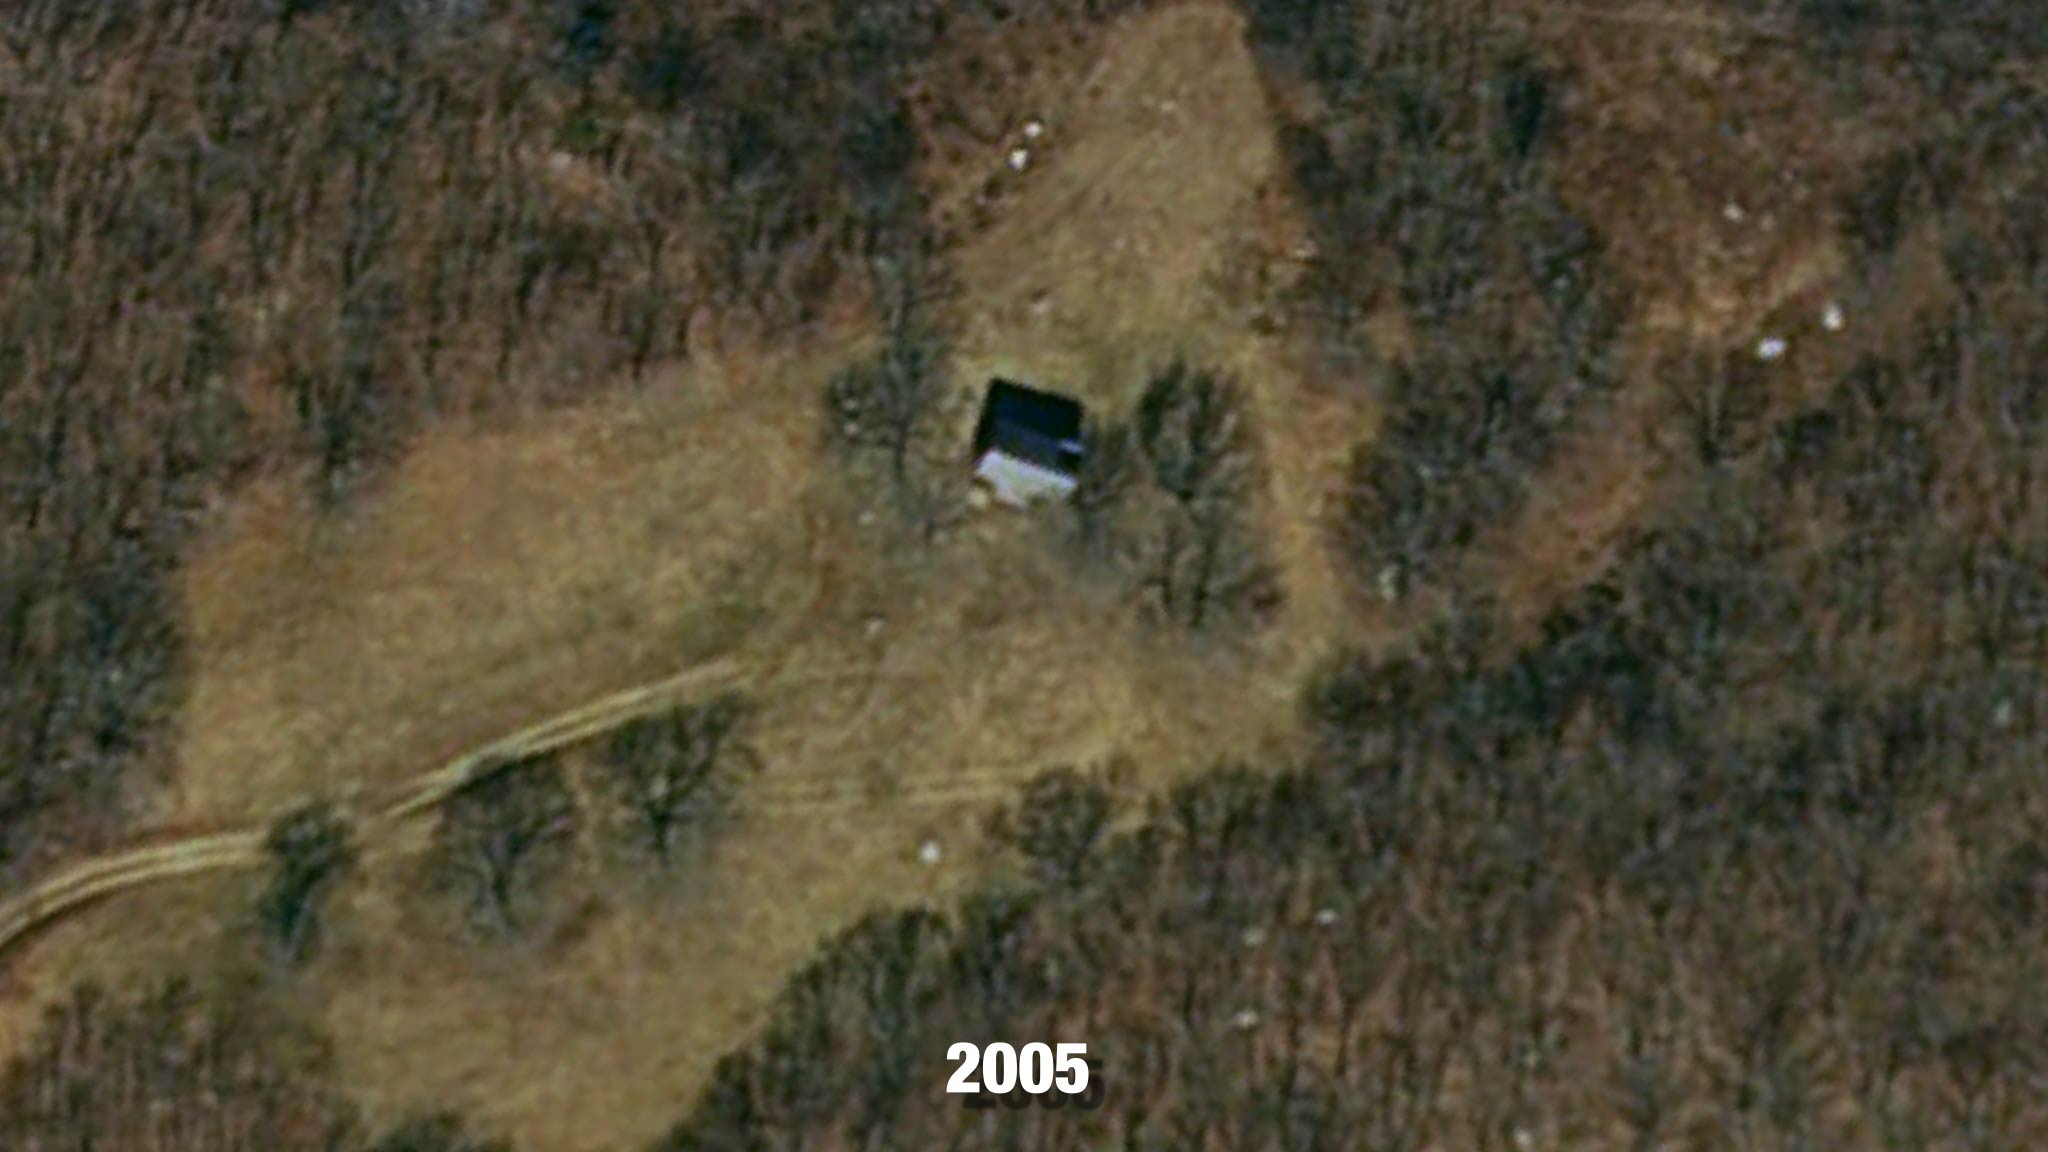 Martha's Vineyard satellite image from 2005 before the anonymous wealthy homeowner's mansion